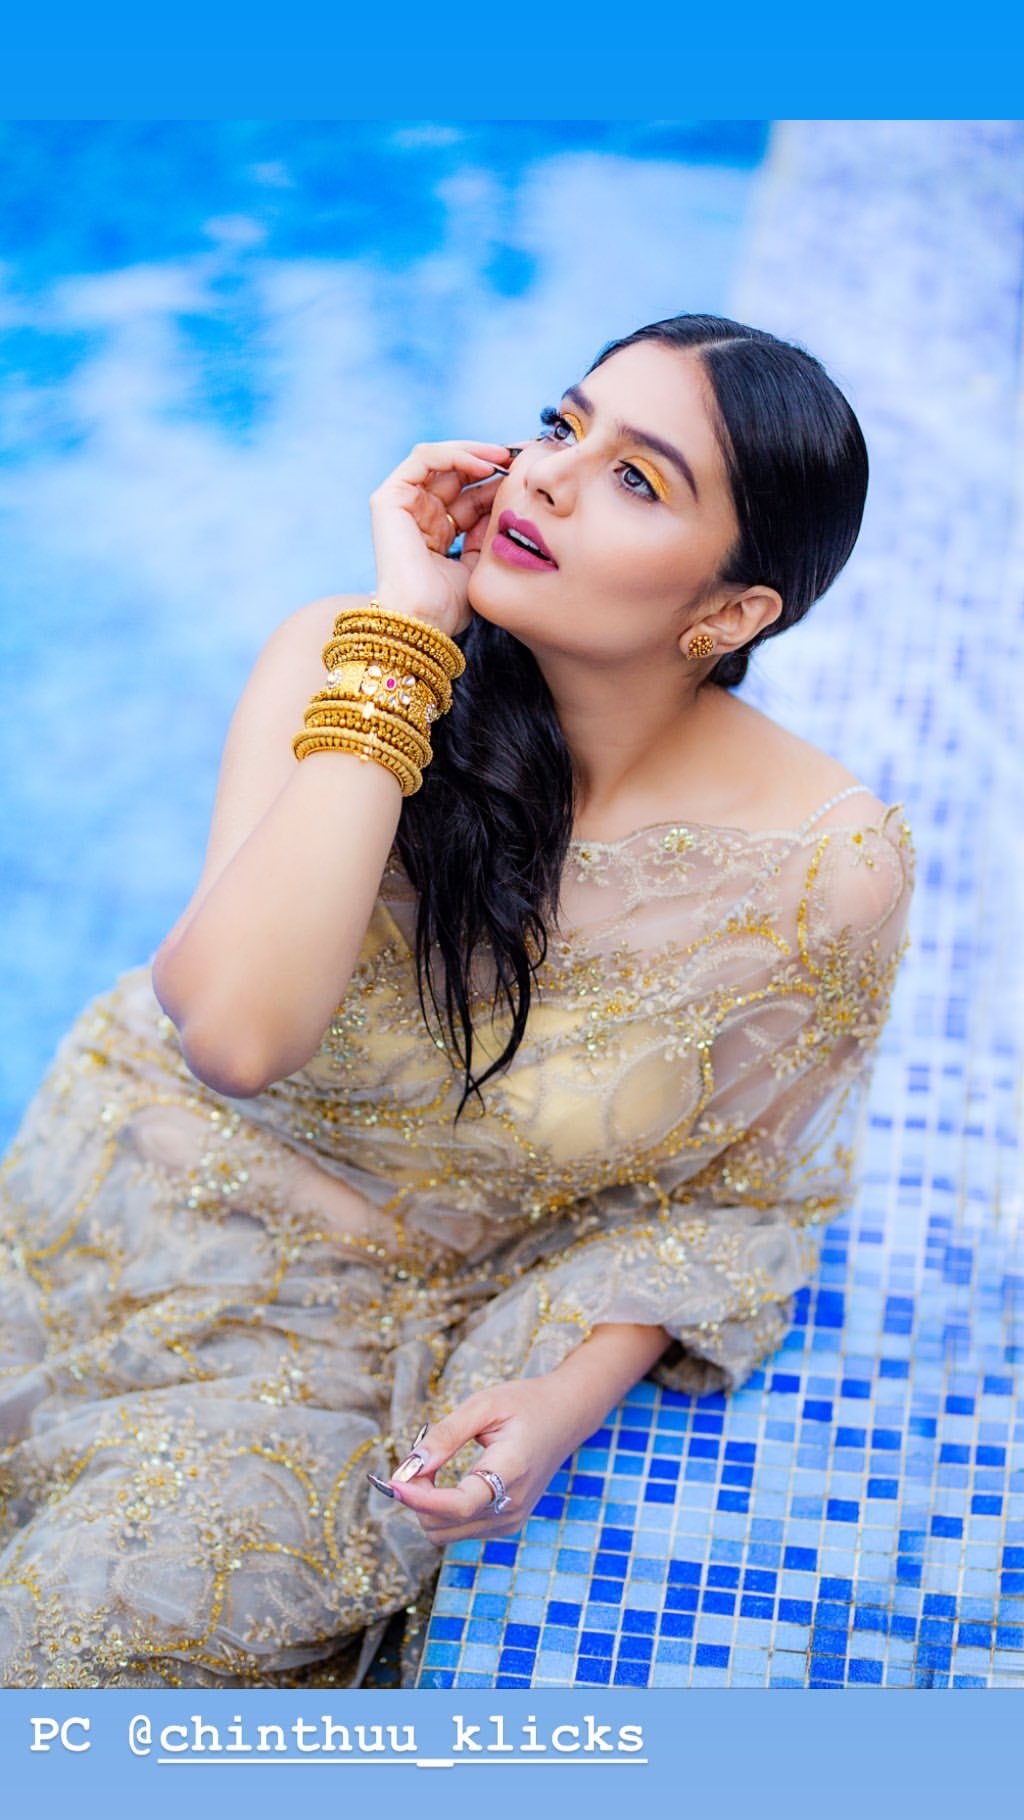 Sree Mukhis Spices The Heat By Getting Wet In Swimming Pool